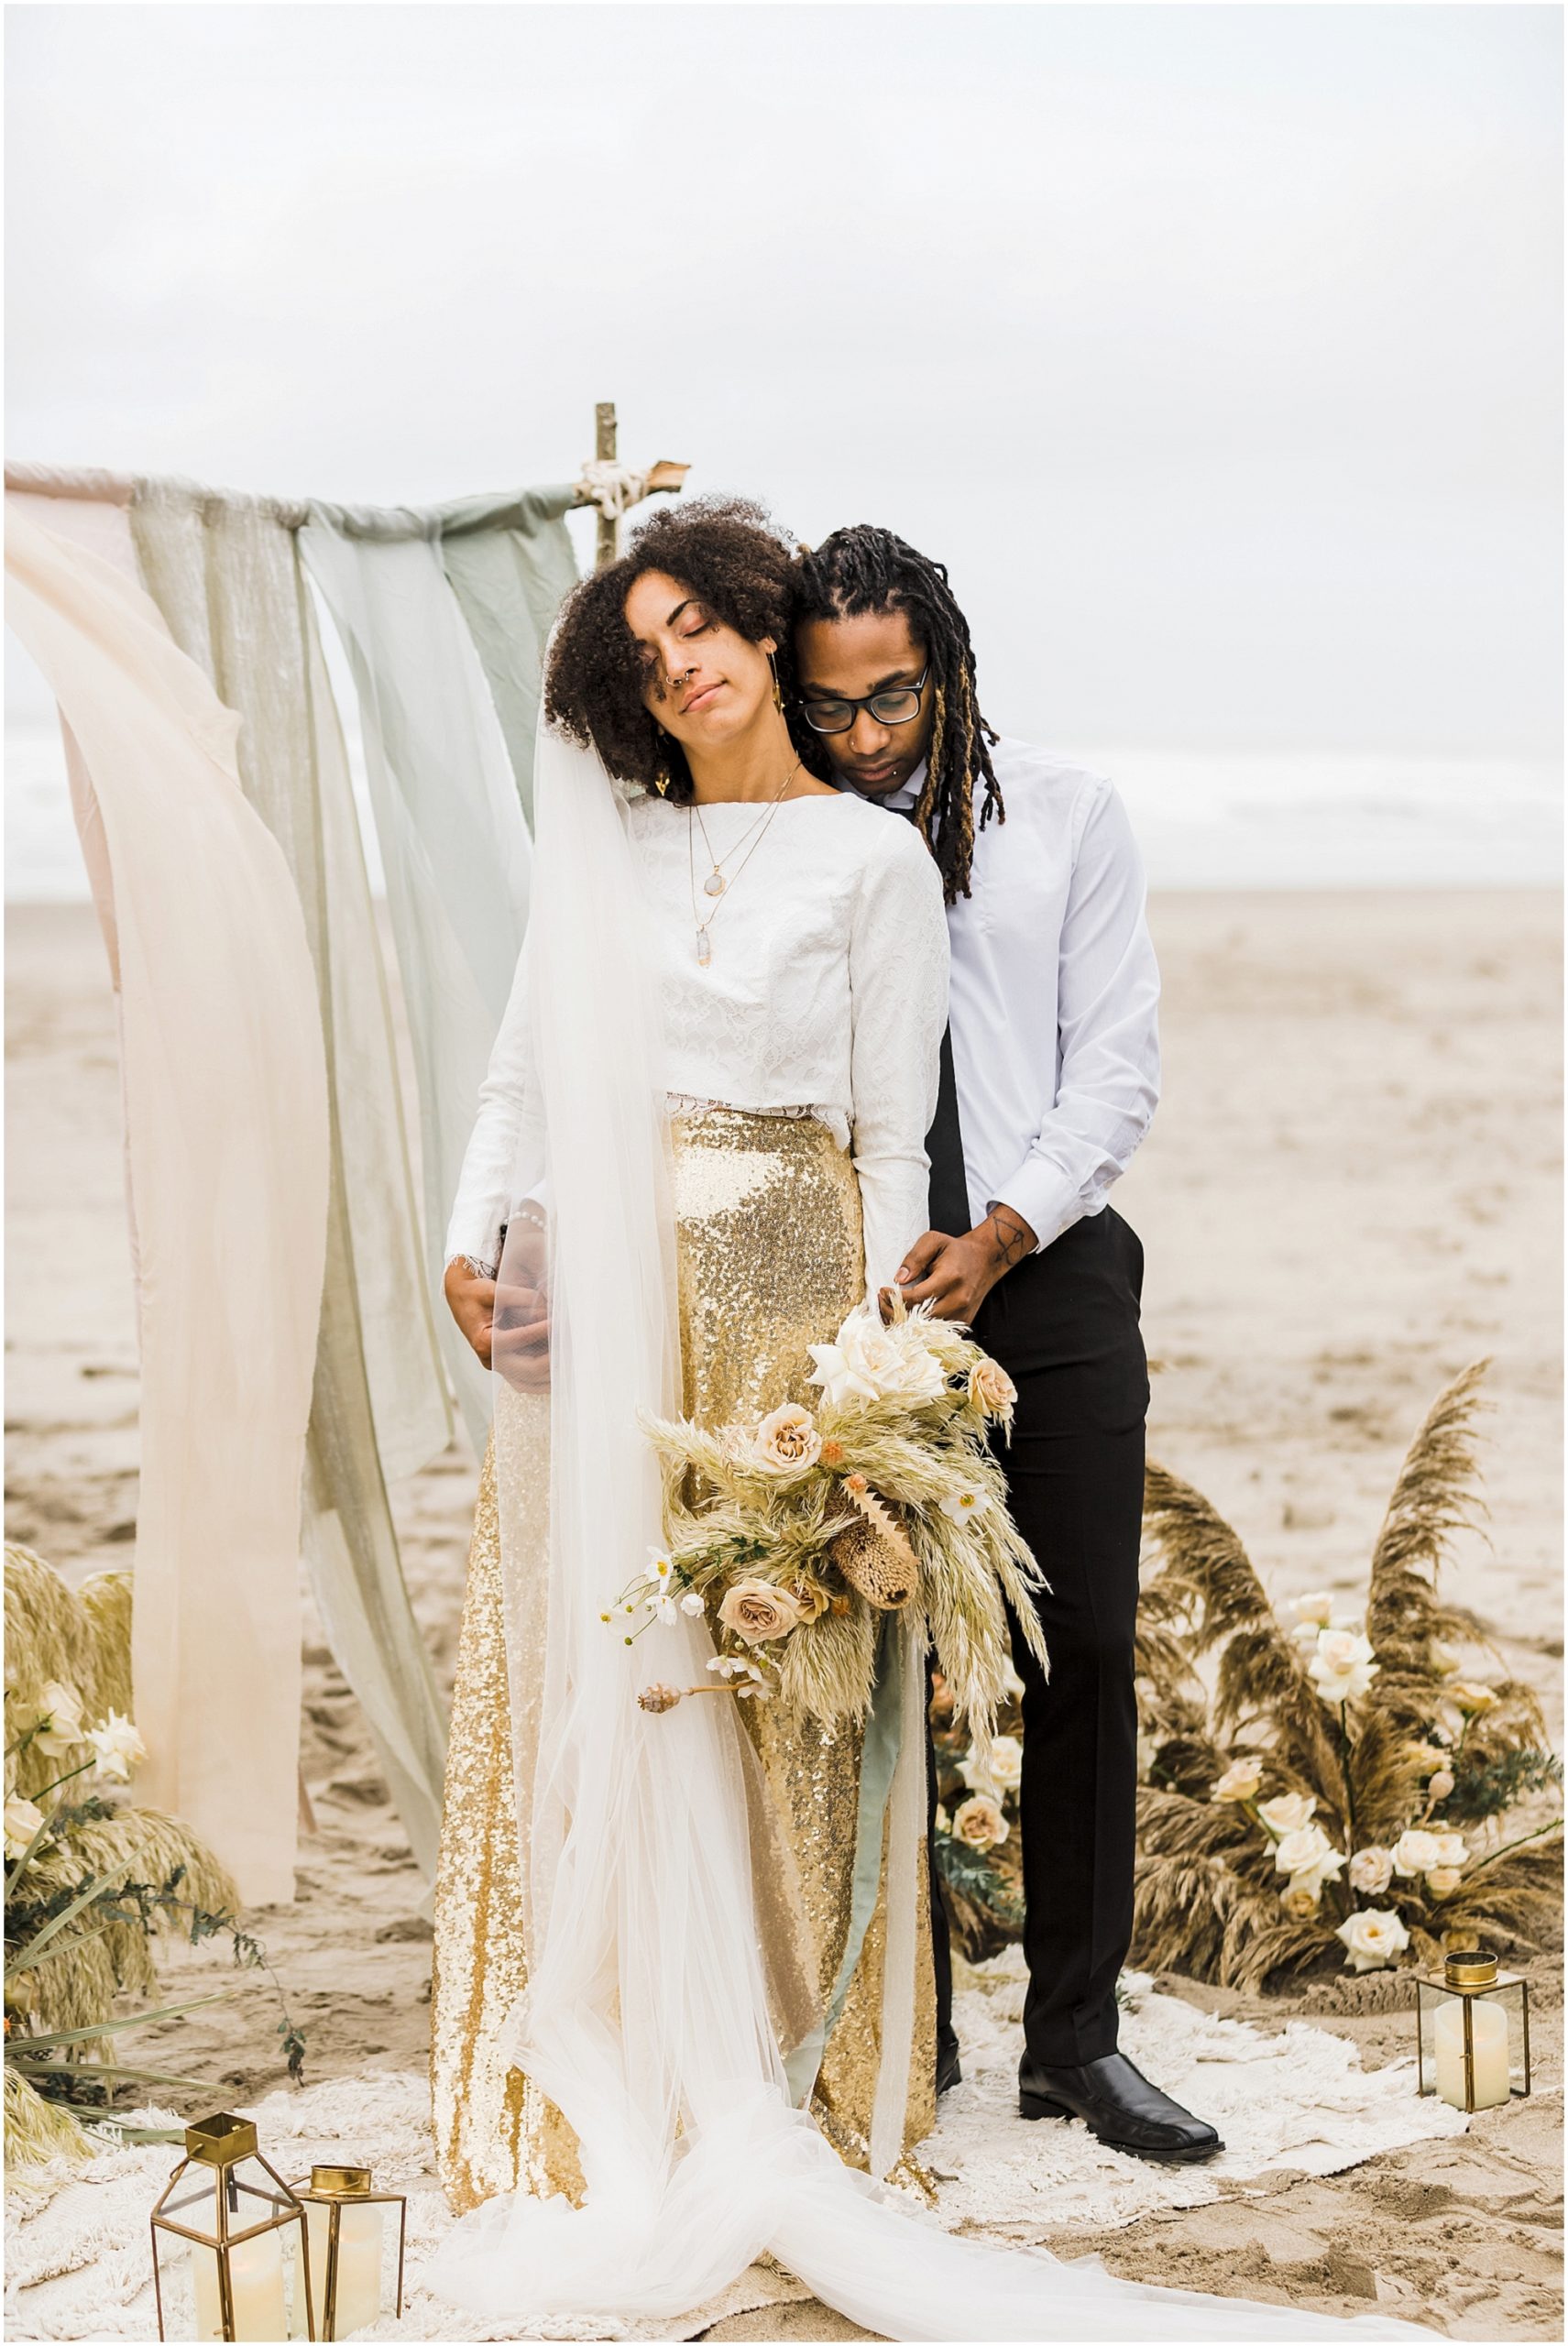 A handsome black groom nuzzles into the shoulder of his beautiful black bride, wearing a white long sleeve cropped top, with a gorgeous gold sequined skirt while standing on a cream rug in the sand. Behind her is the rustic wood arch with hand dyed silk ribbons in light blush, sage green and cream. Two large floral arrangements made of tall grasses and roses in a neutral color palette frame the arch, with the Pacific Ocean in the backdrop. | Erica Swantek Photography